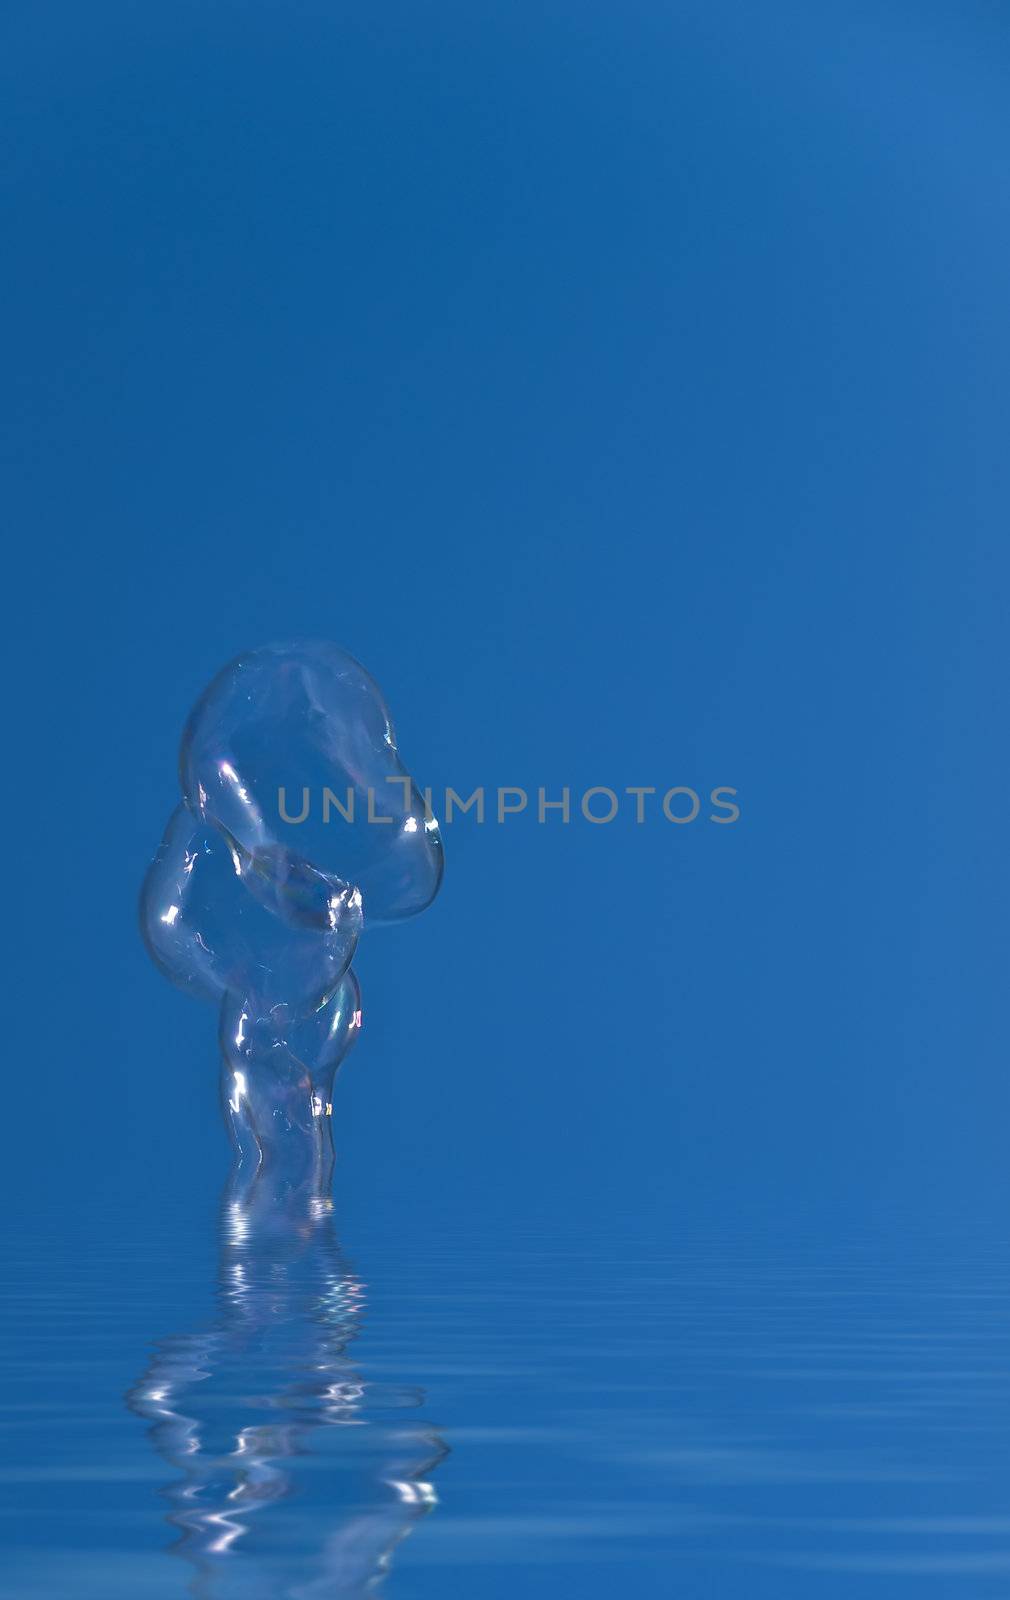 Abstract image of soap water bubble coming out of water